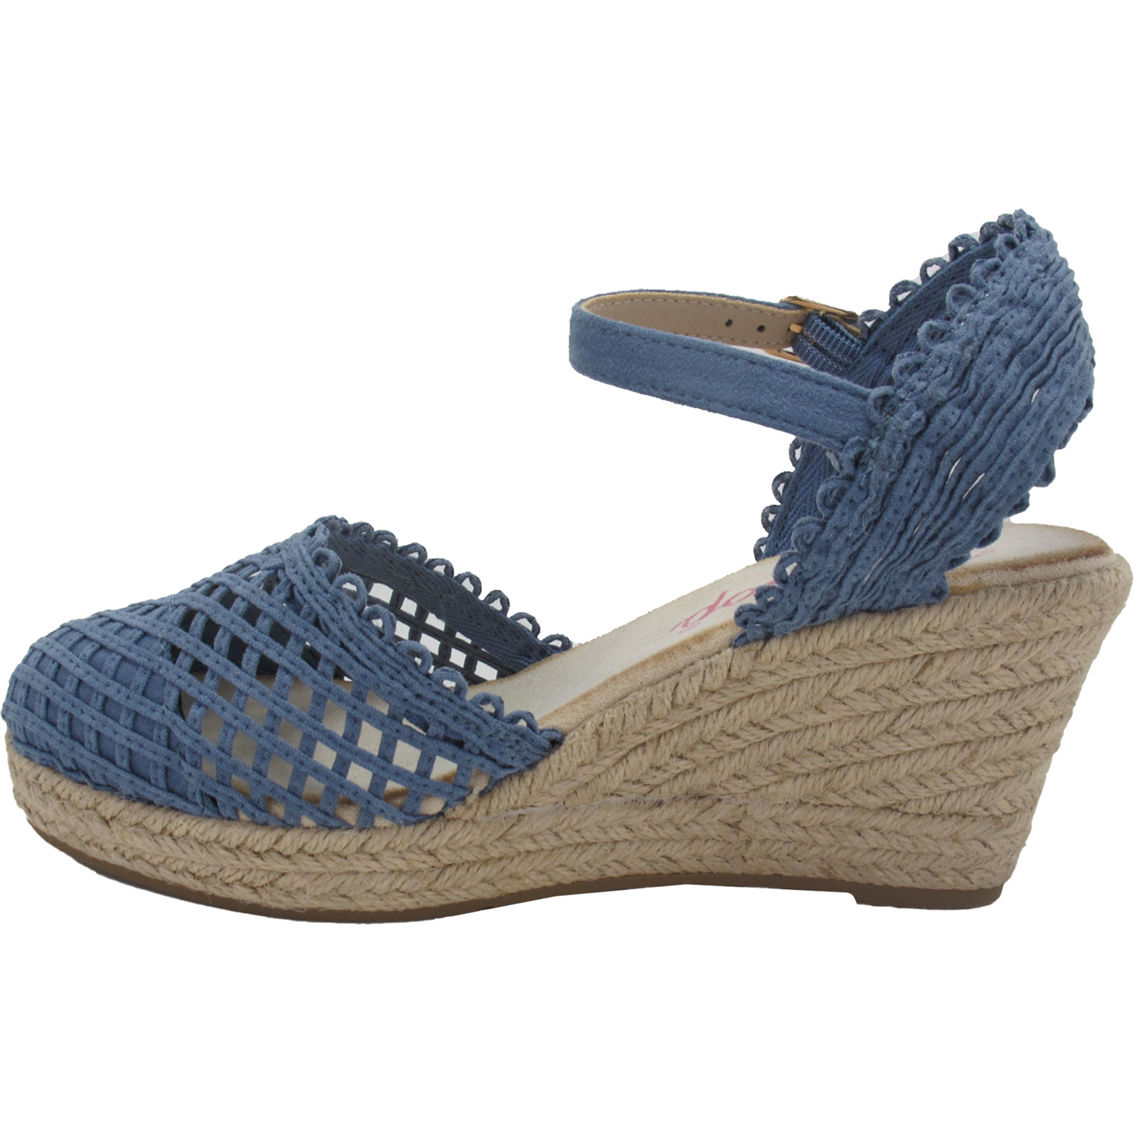 Jellypop Sharla Wedges - Image 3 of 6